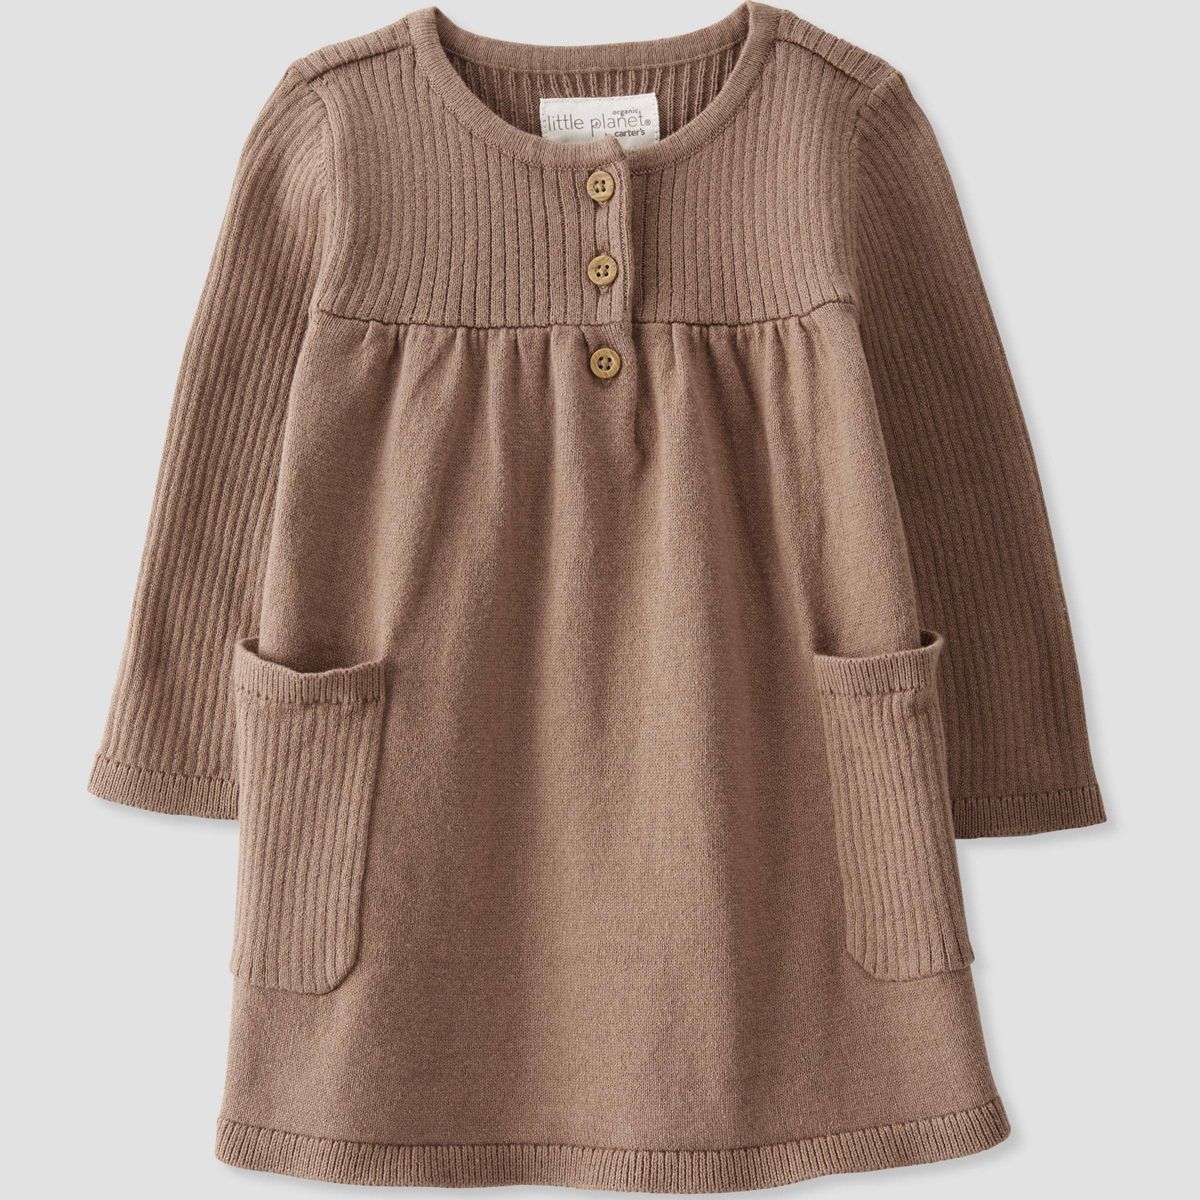 Little Planet by Carter’s Baby Girls' Knit Dress - Brown | Target